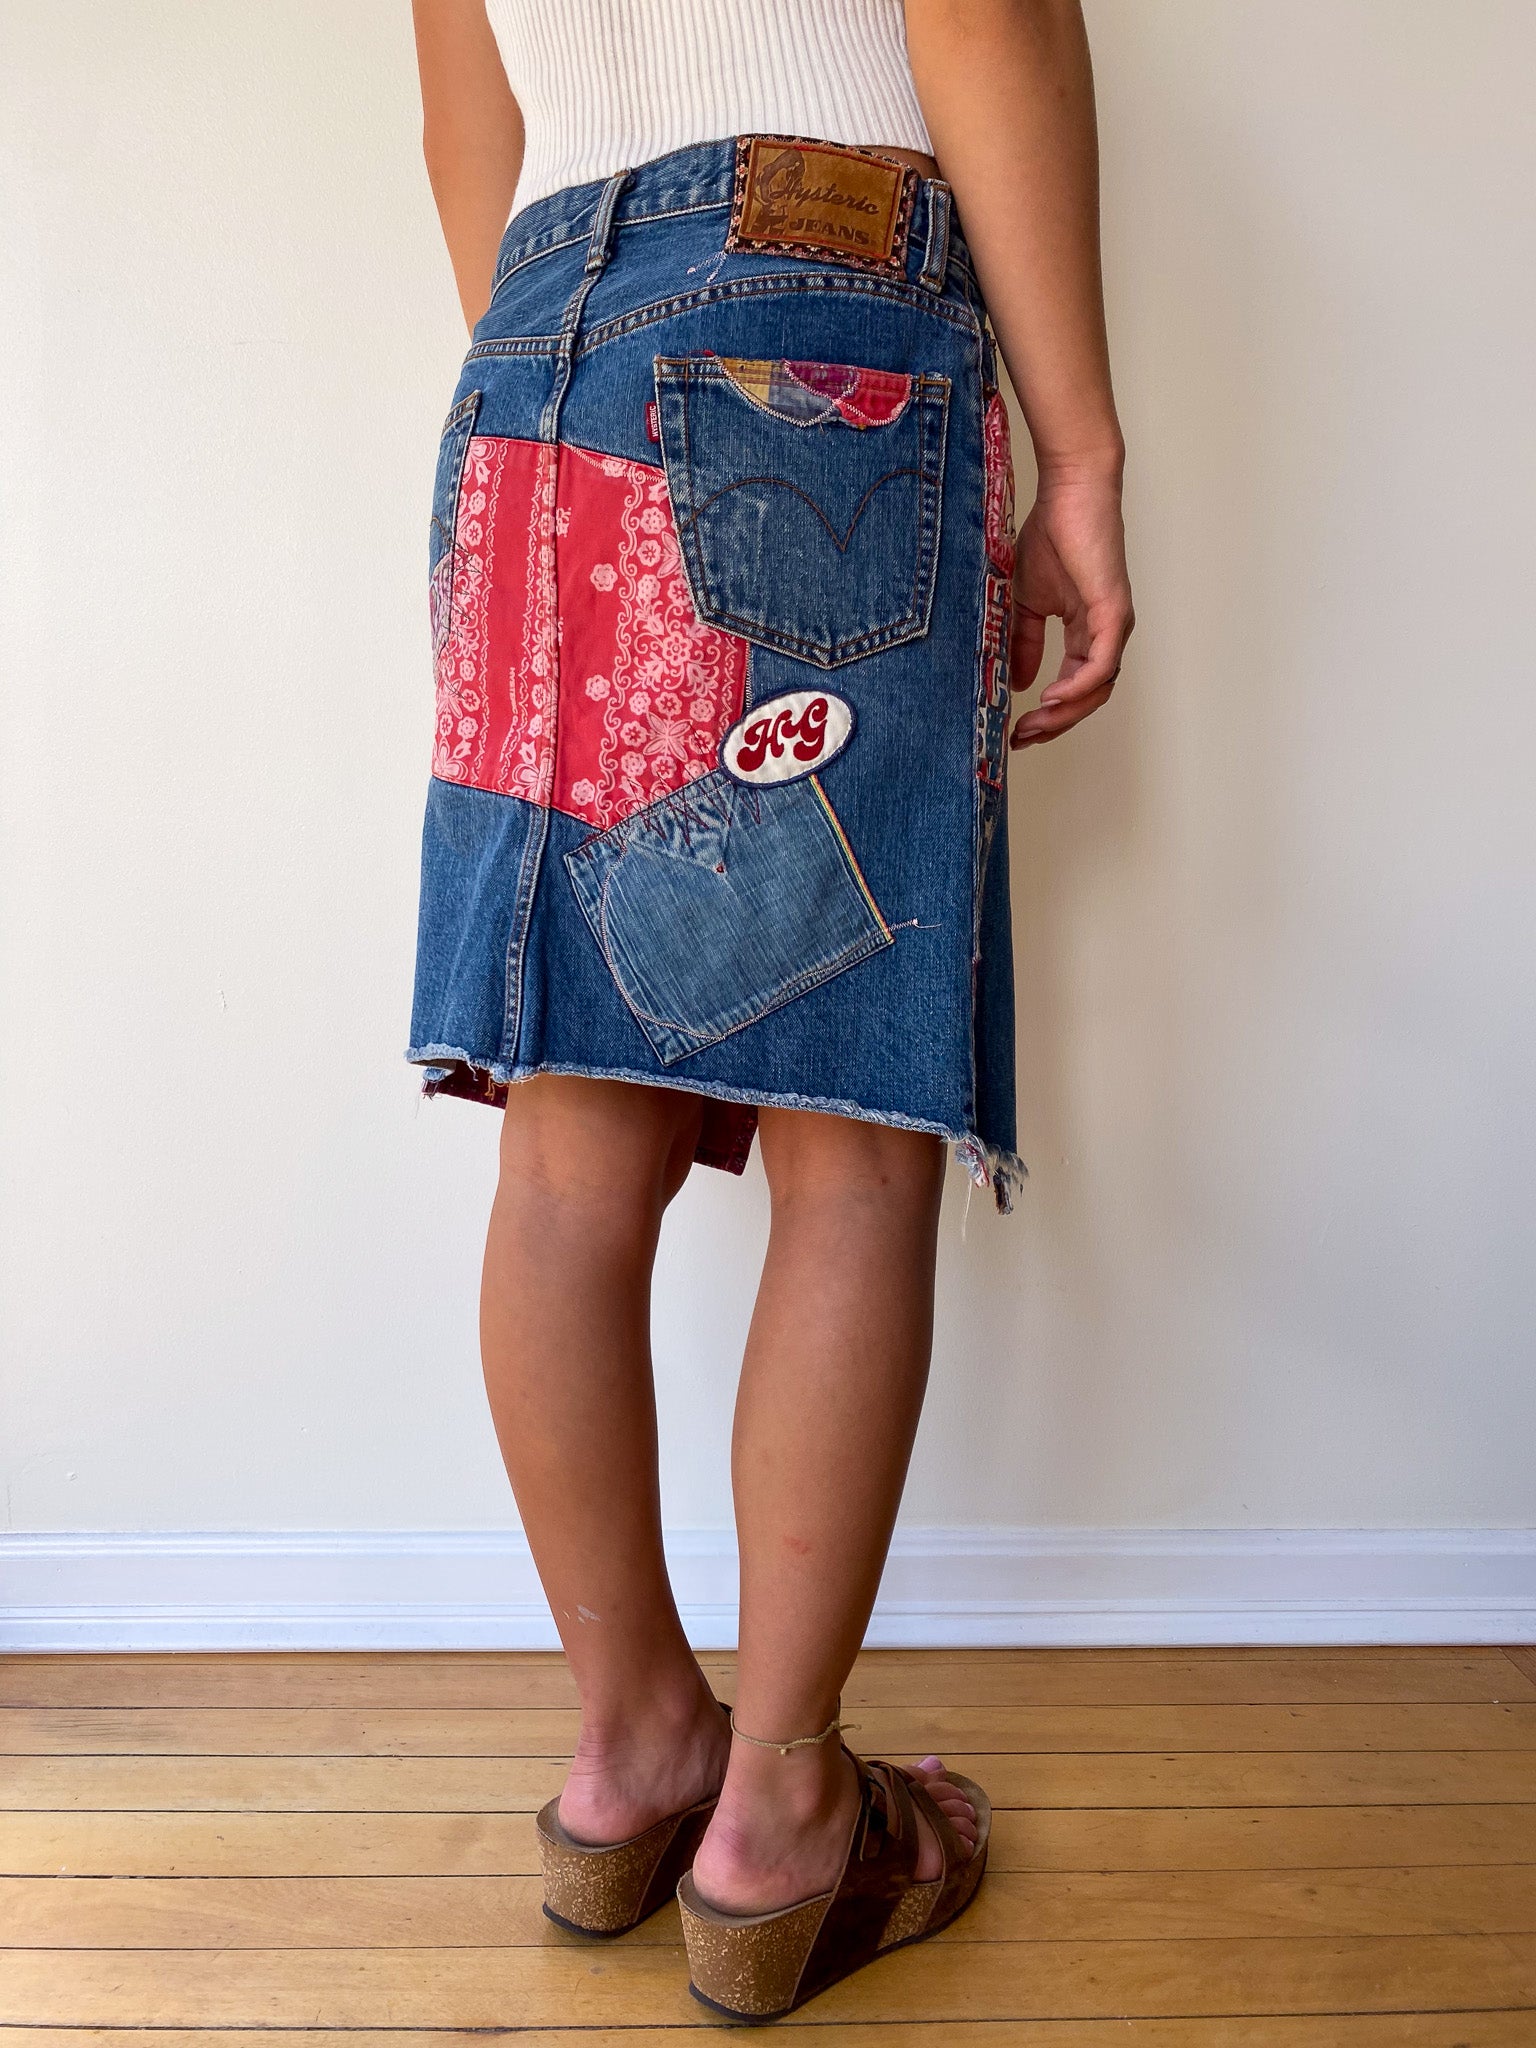 DIY Old Denim Jeans into Fashionable Skirts | Recycled Crafts